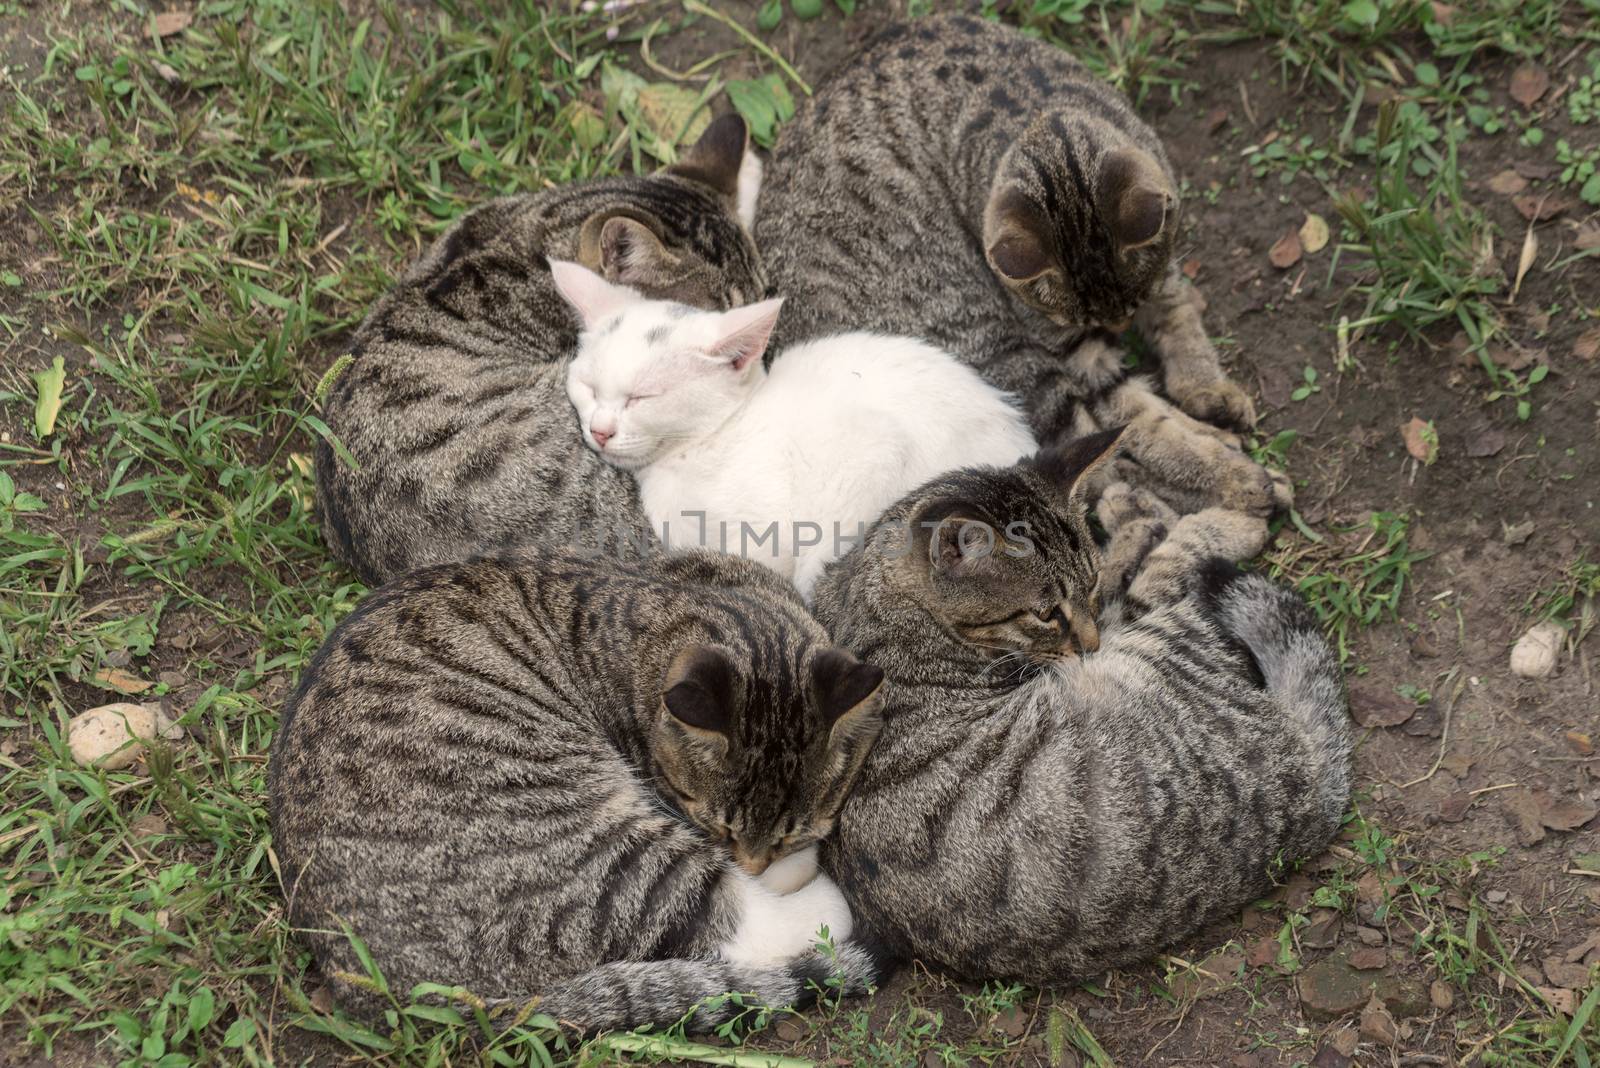 Homeless cats sleep. Cats are nestled together